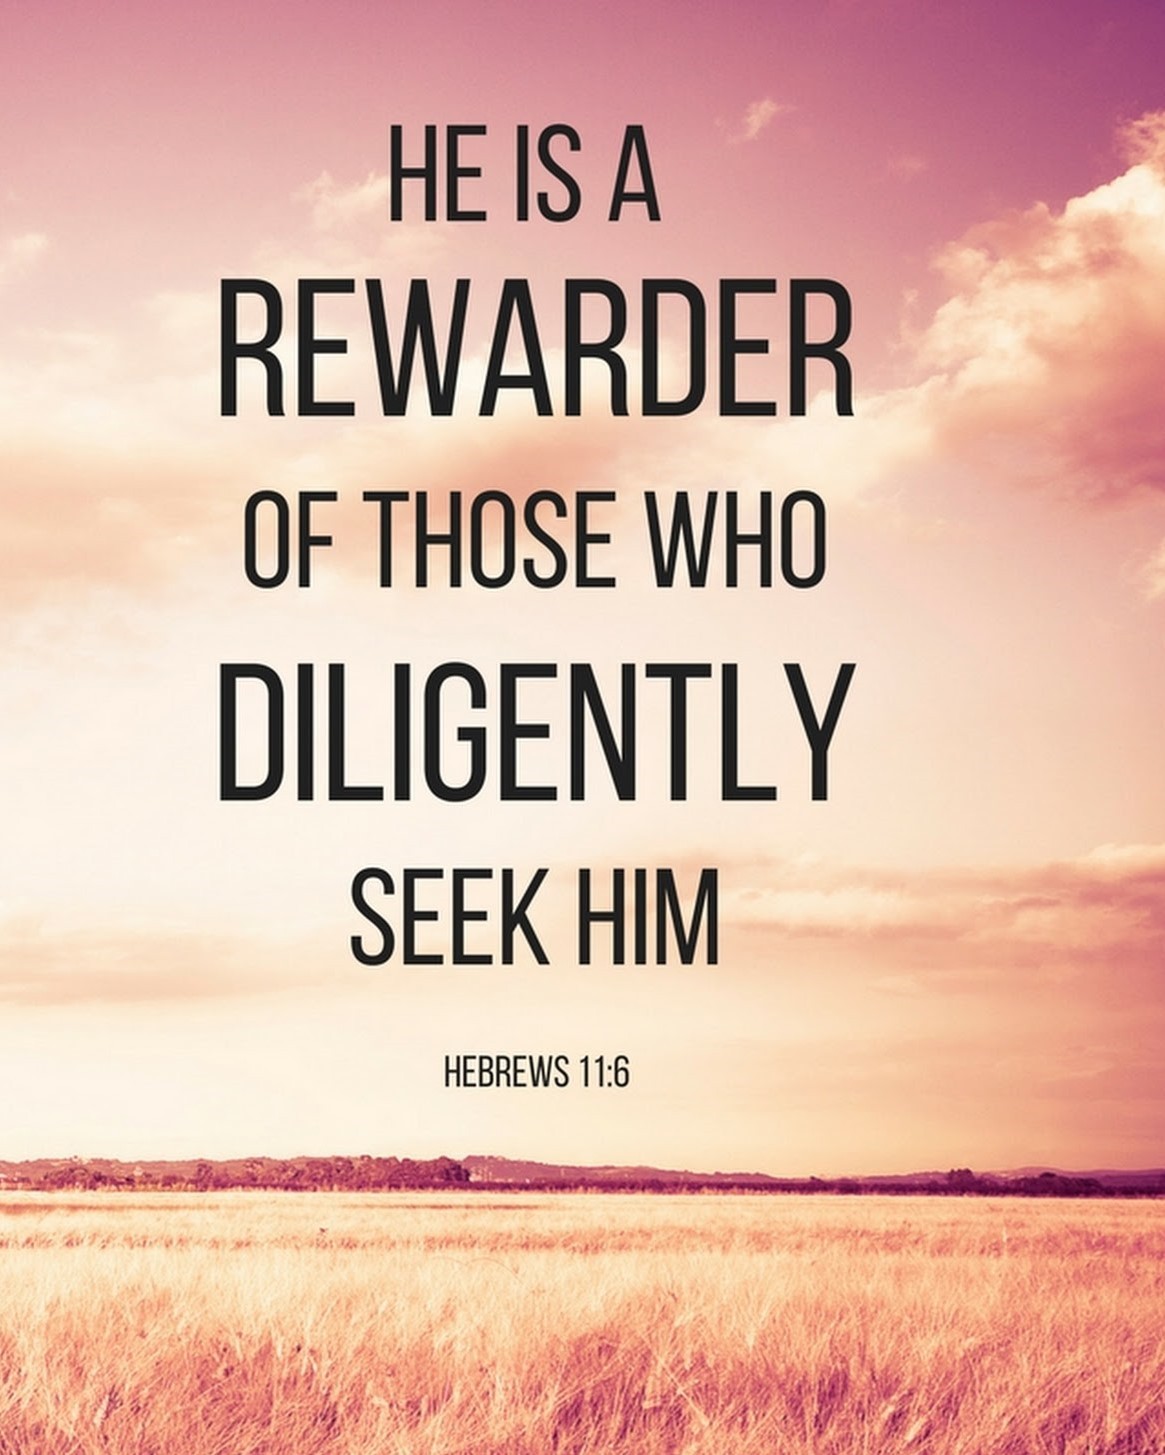 Hebrews 11:6 (NKJV) -
But without faith it is impossible to please Him, for he who comes to God must believe that He is, and that He is a
rewarder of those who diligently seek Him.